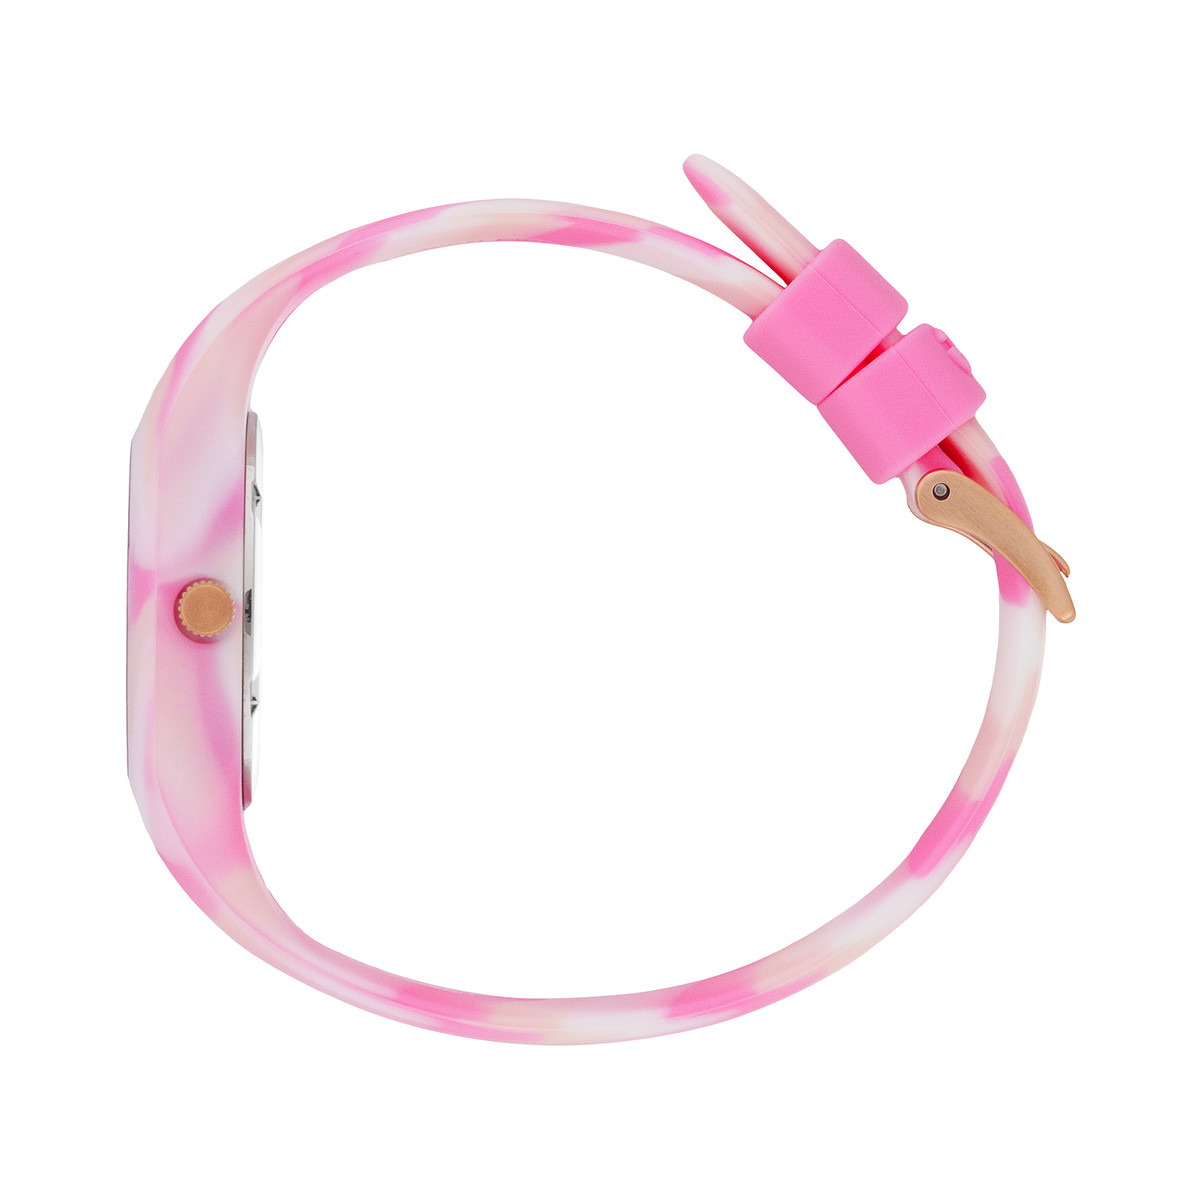 Montre ICE WATCH Ice Tie and Dye femme bracelet silicone rose - vue 2